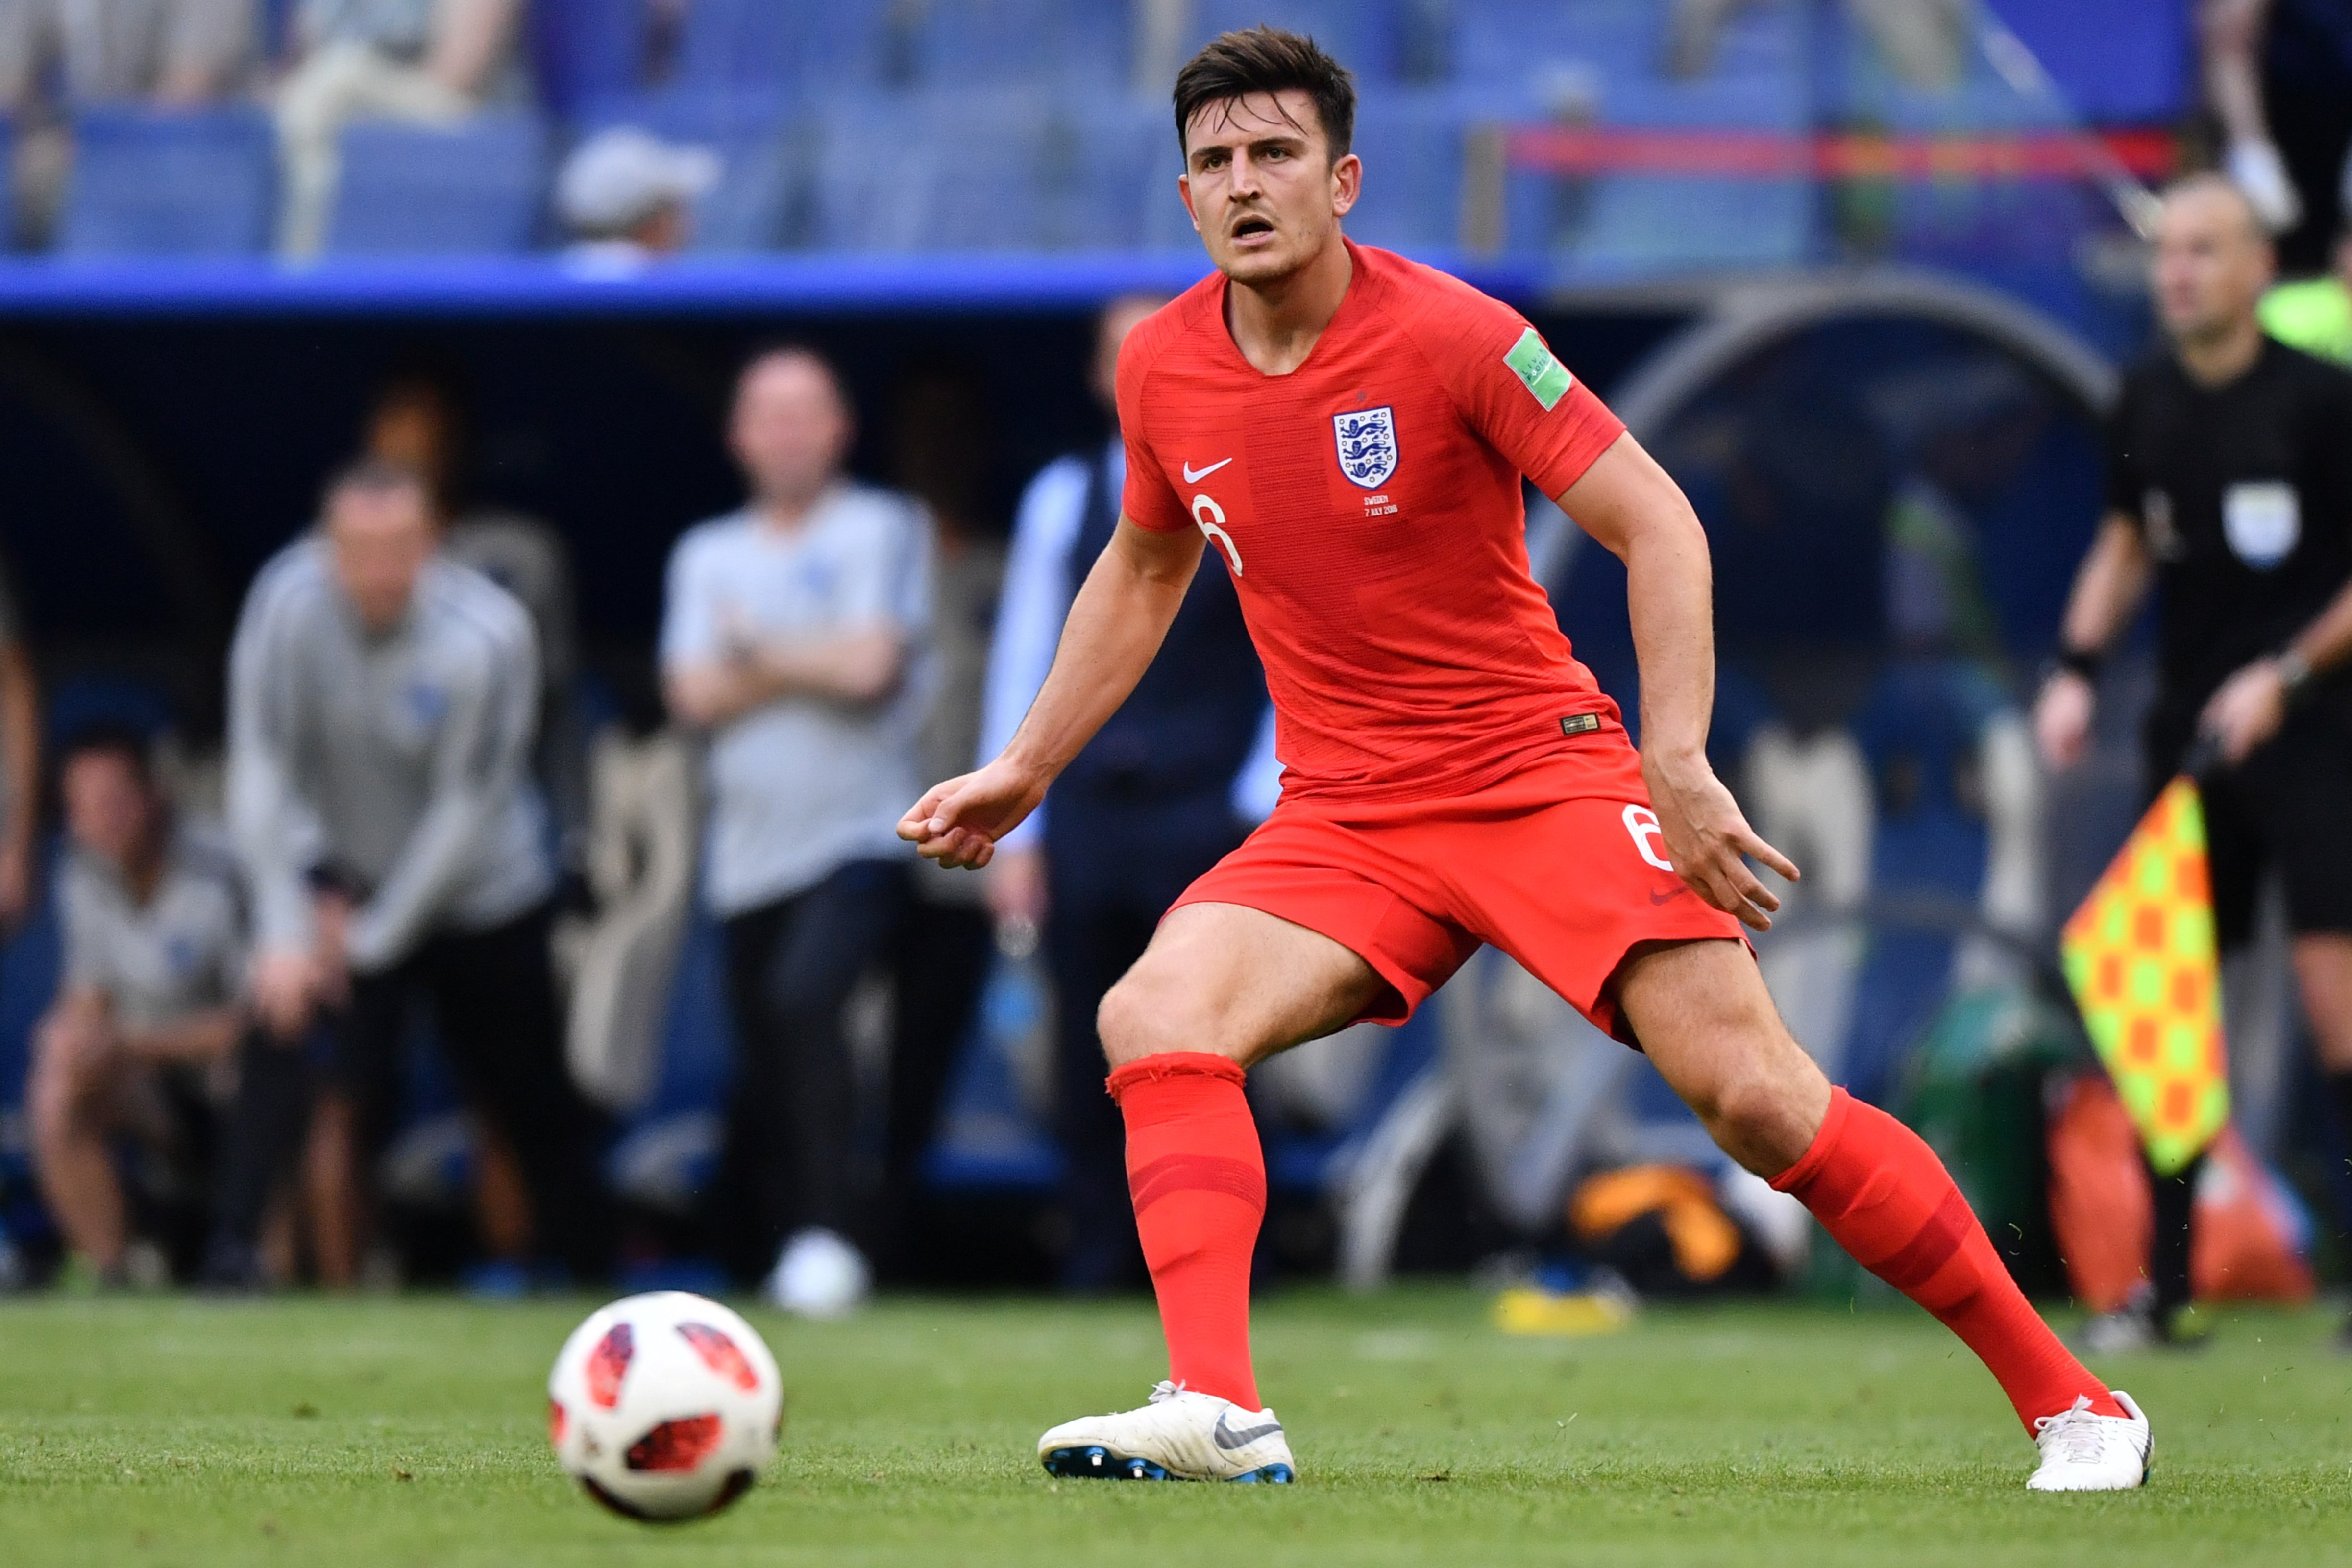 England's defender Harry Maguire drives the ball during the Russia 2018 World Cup quarter-final football match between Sweden and England at the Samara Arena in Samara on July 7, 2018. (FABRICE COFFRINI—AFP/Getty Images)